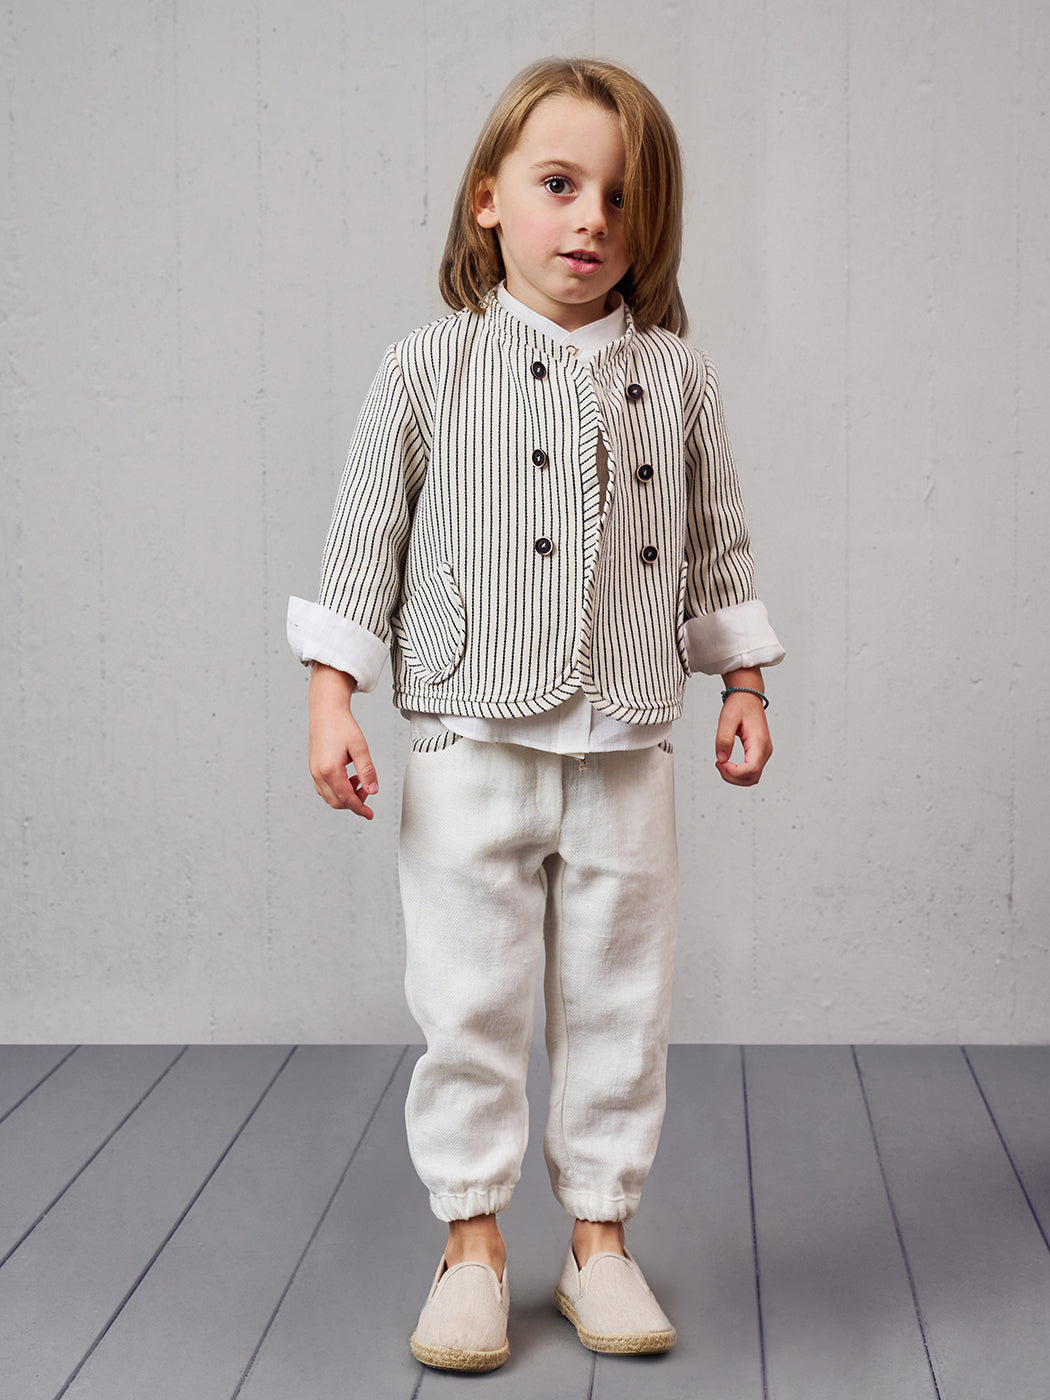 Baptism Linen outfit 5pcs with striped Jacket - KERT